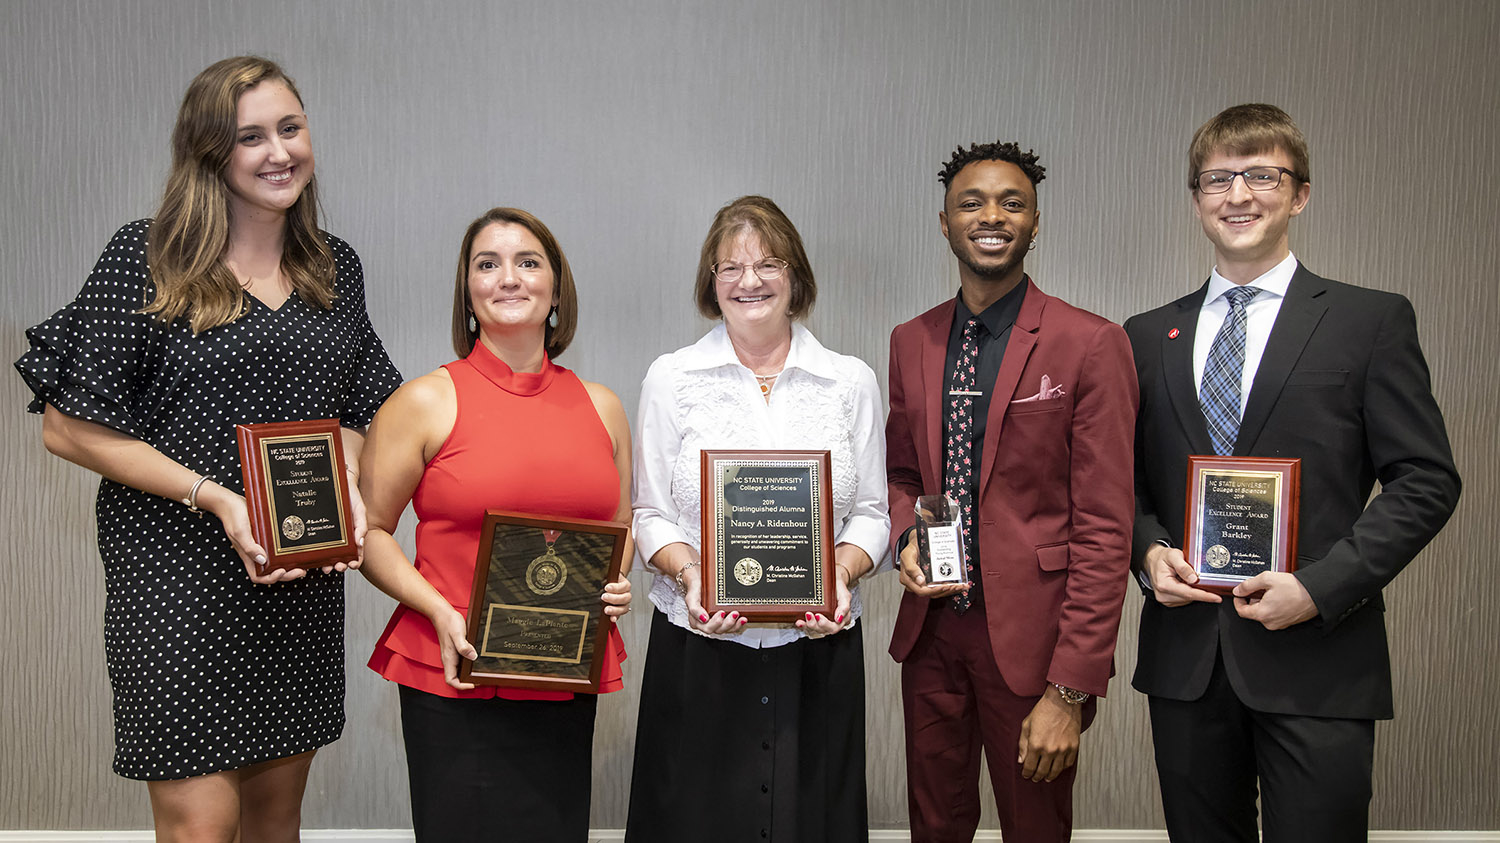 College of Sciences award winners for 2019